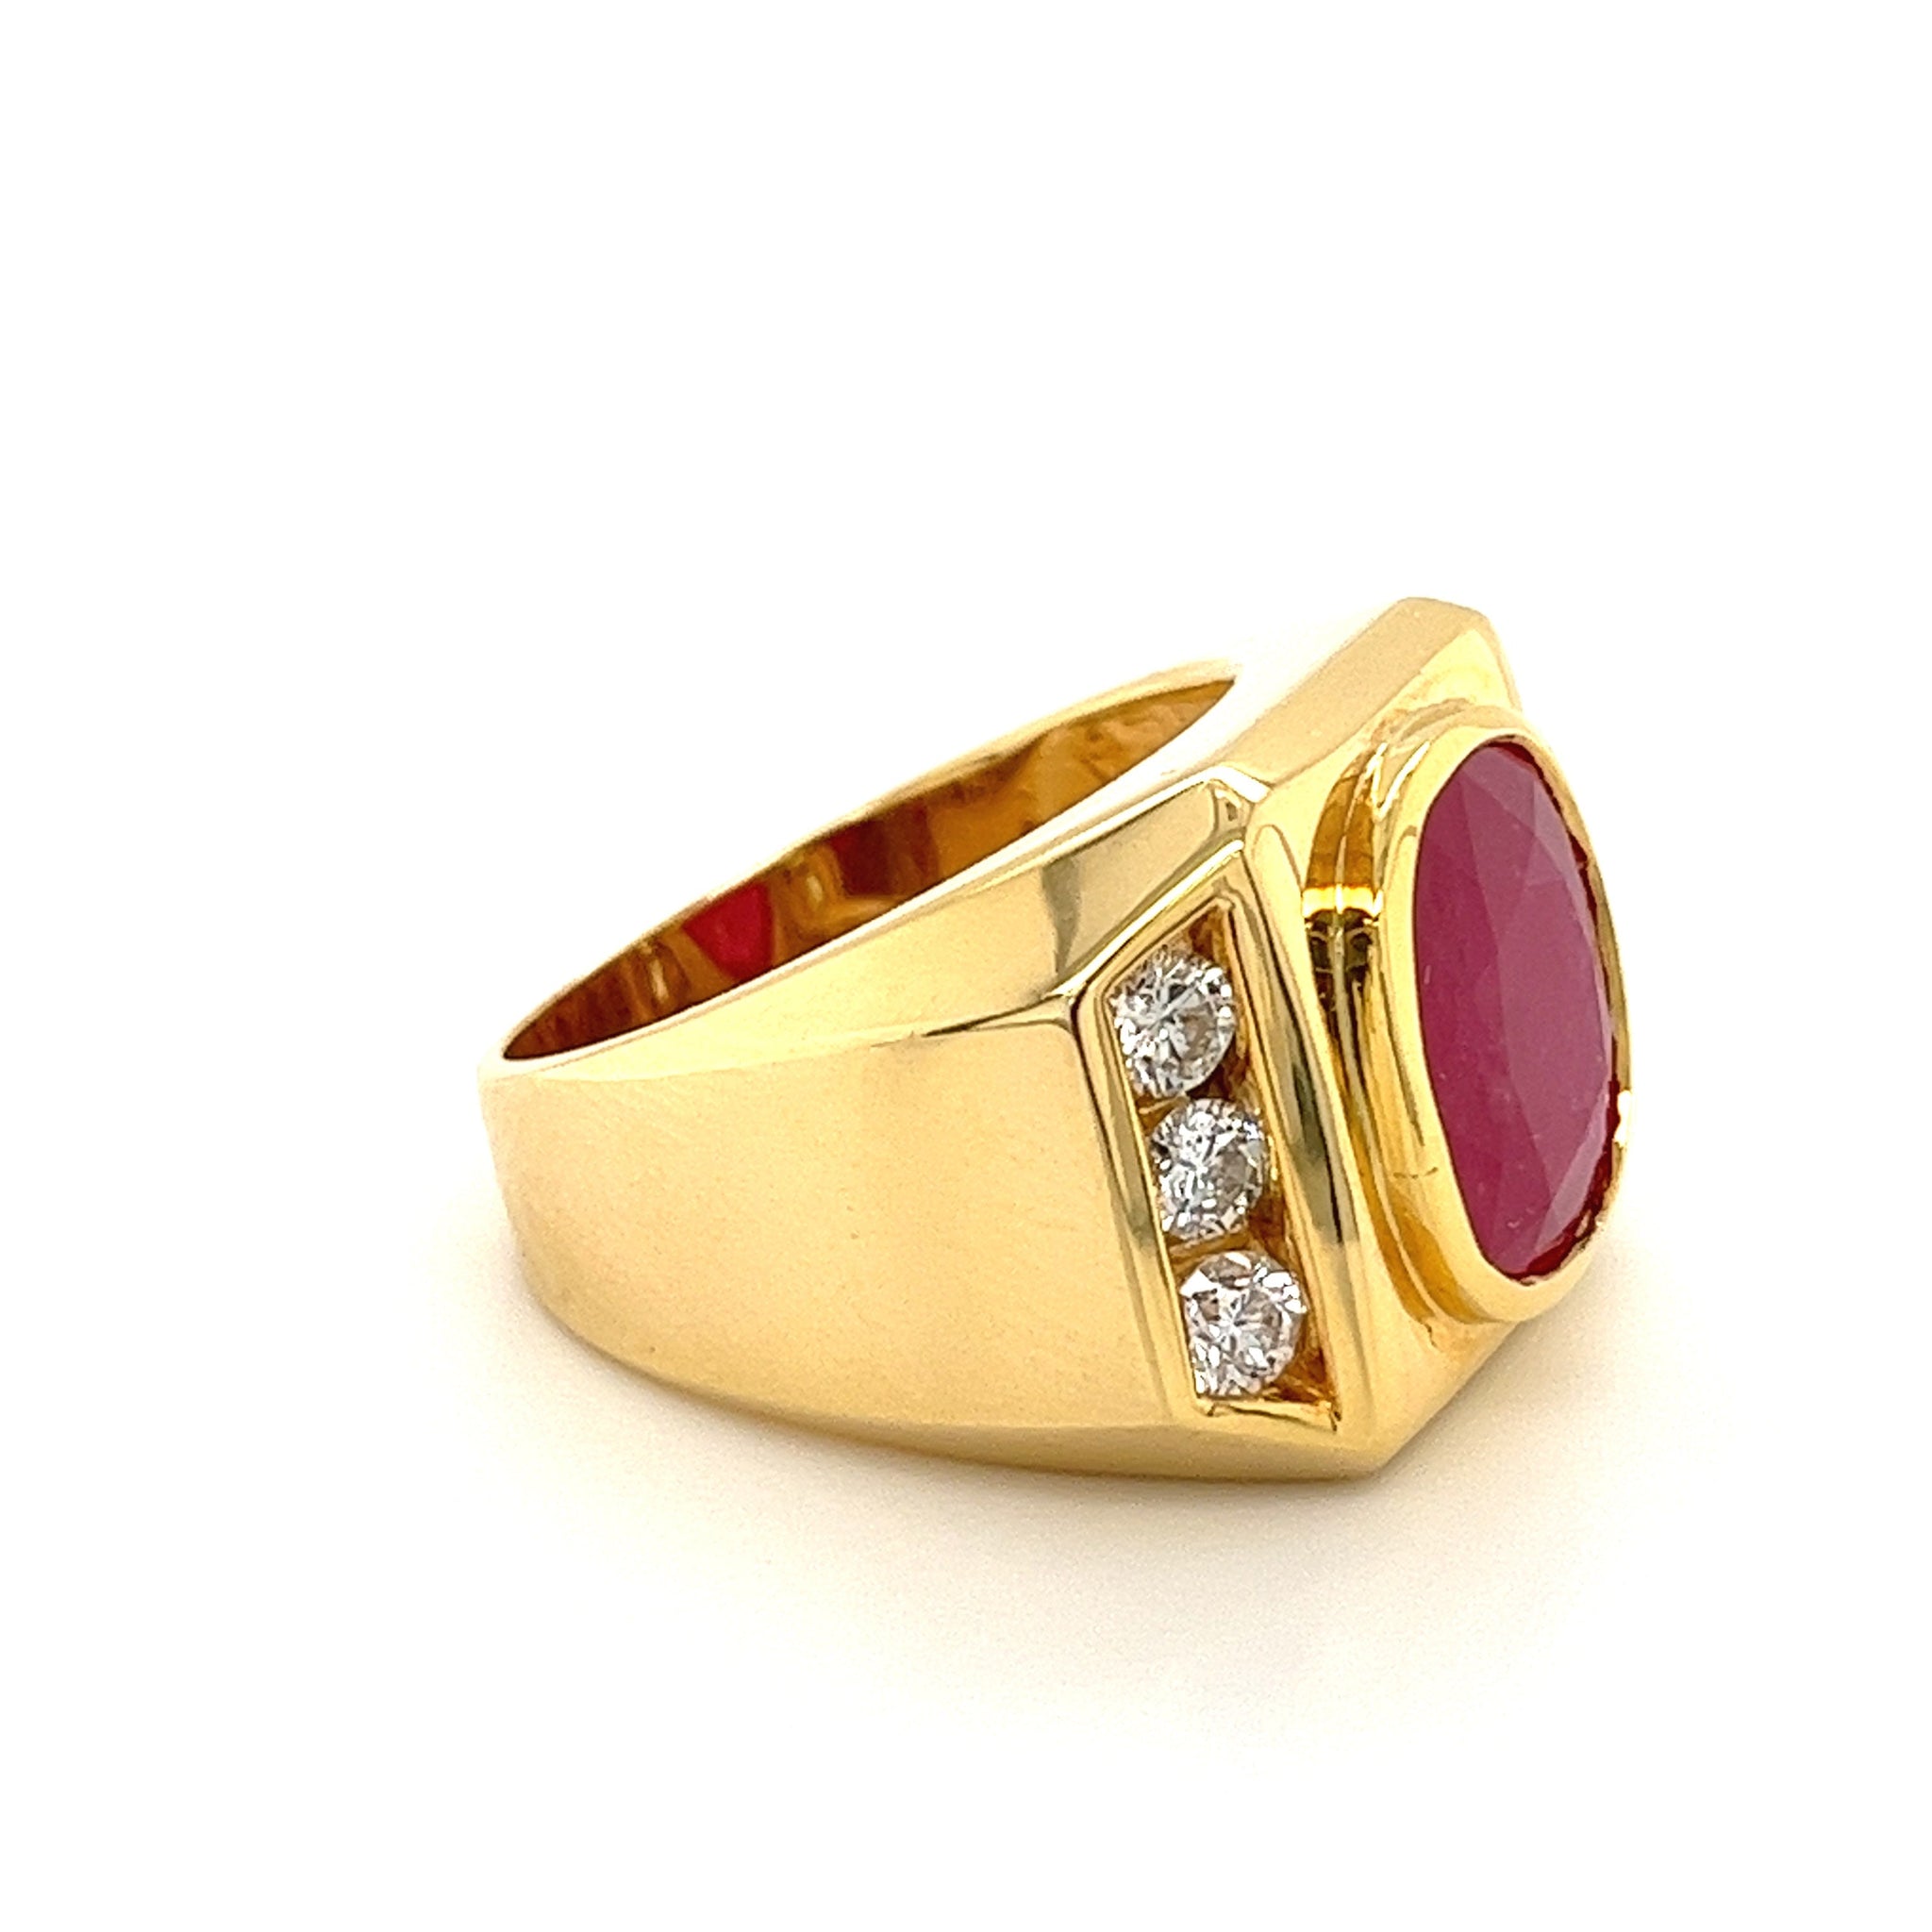 25 Beautiful Ruby Engagement Rings - hitched.co.uk - hitched.co.uk